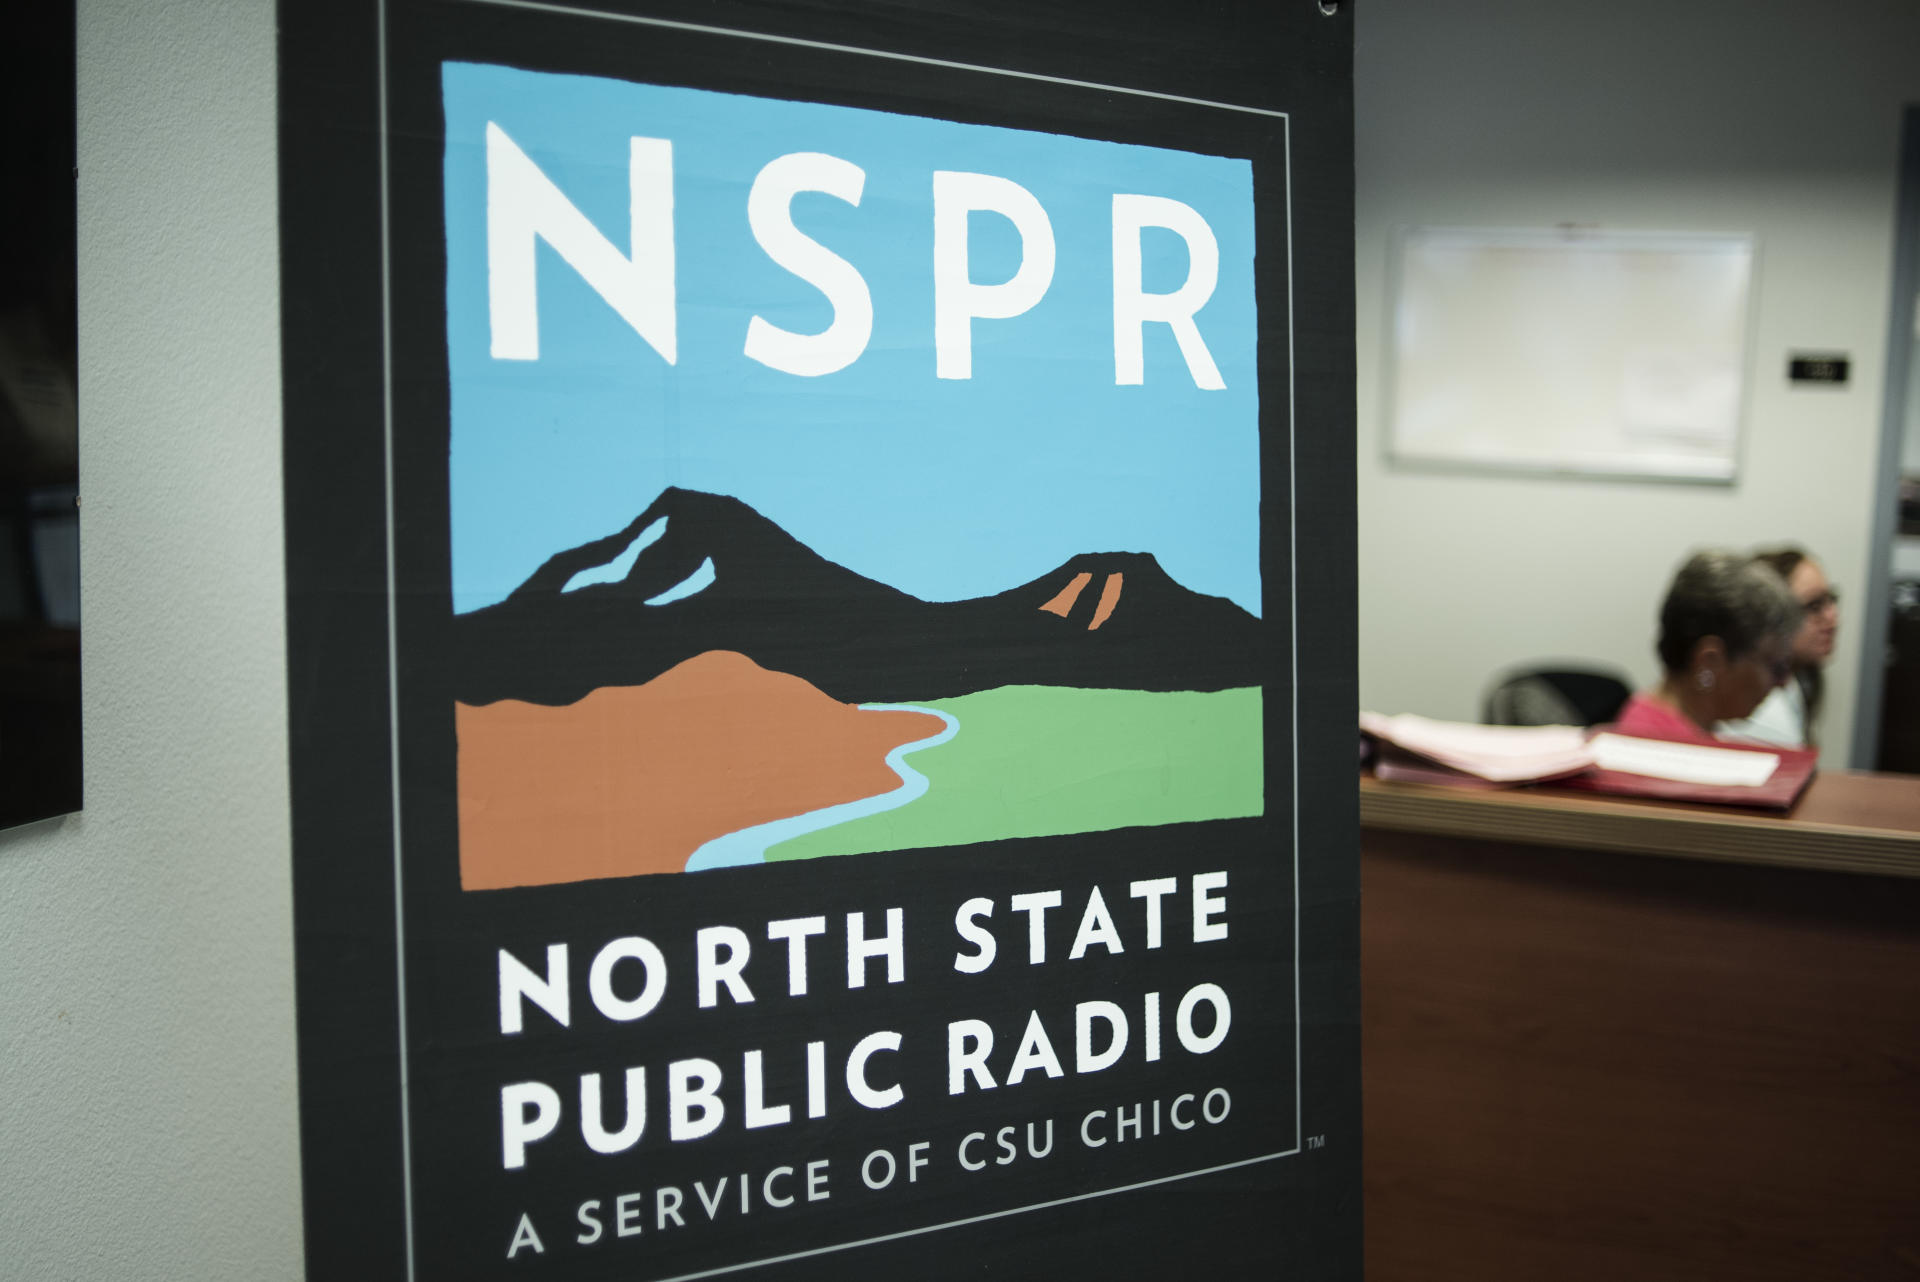 A sign for North State Public Radio